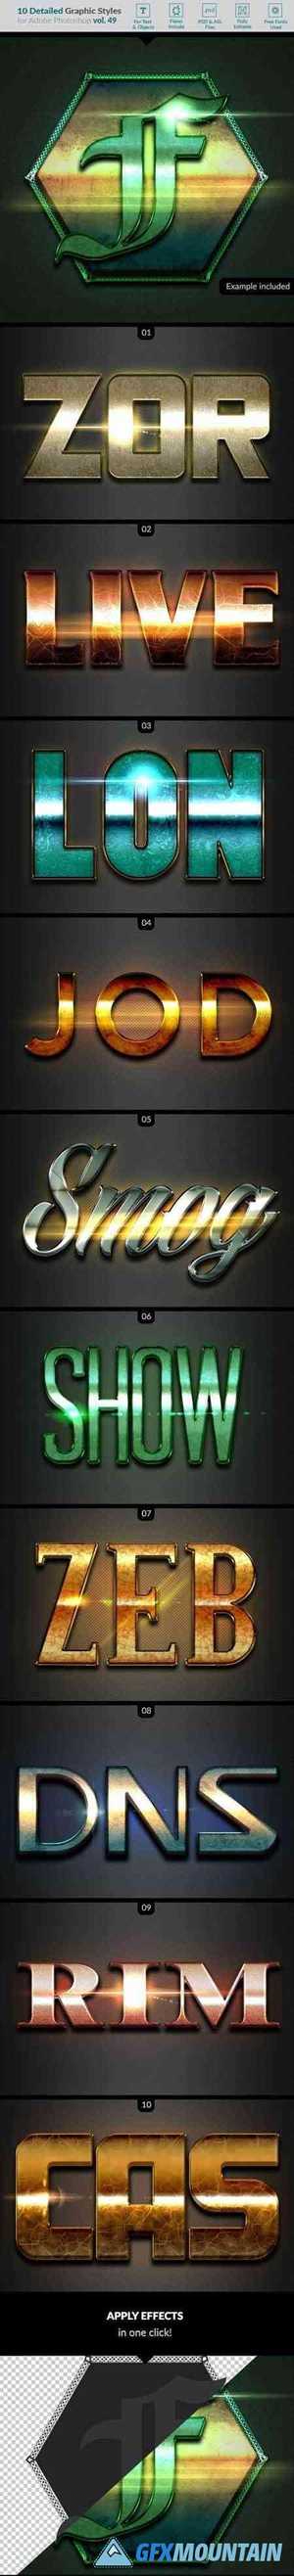 10 Text Effects Vol. 49 26466672